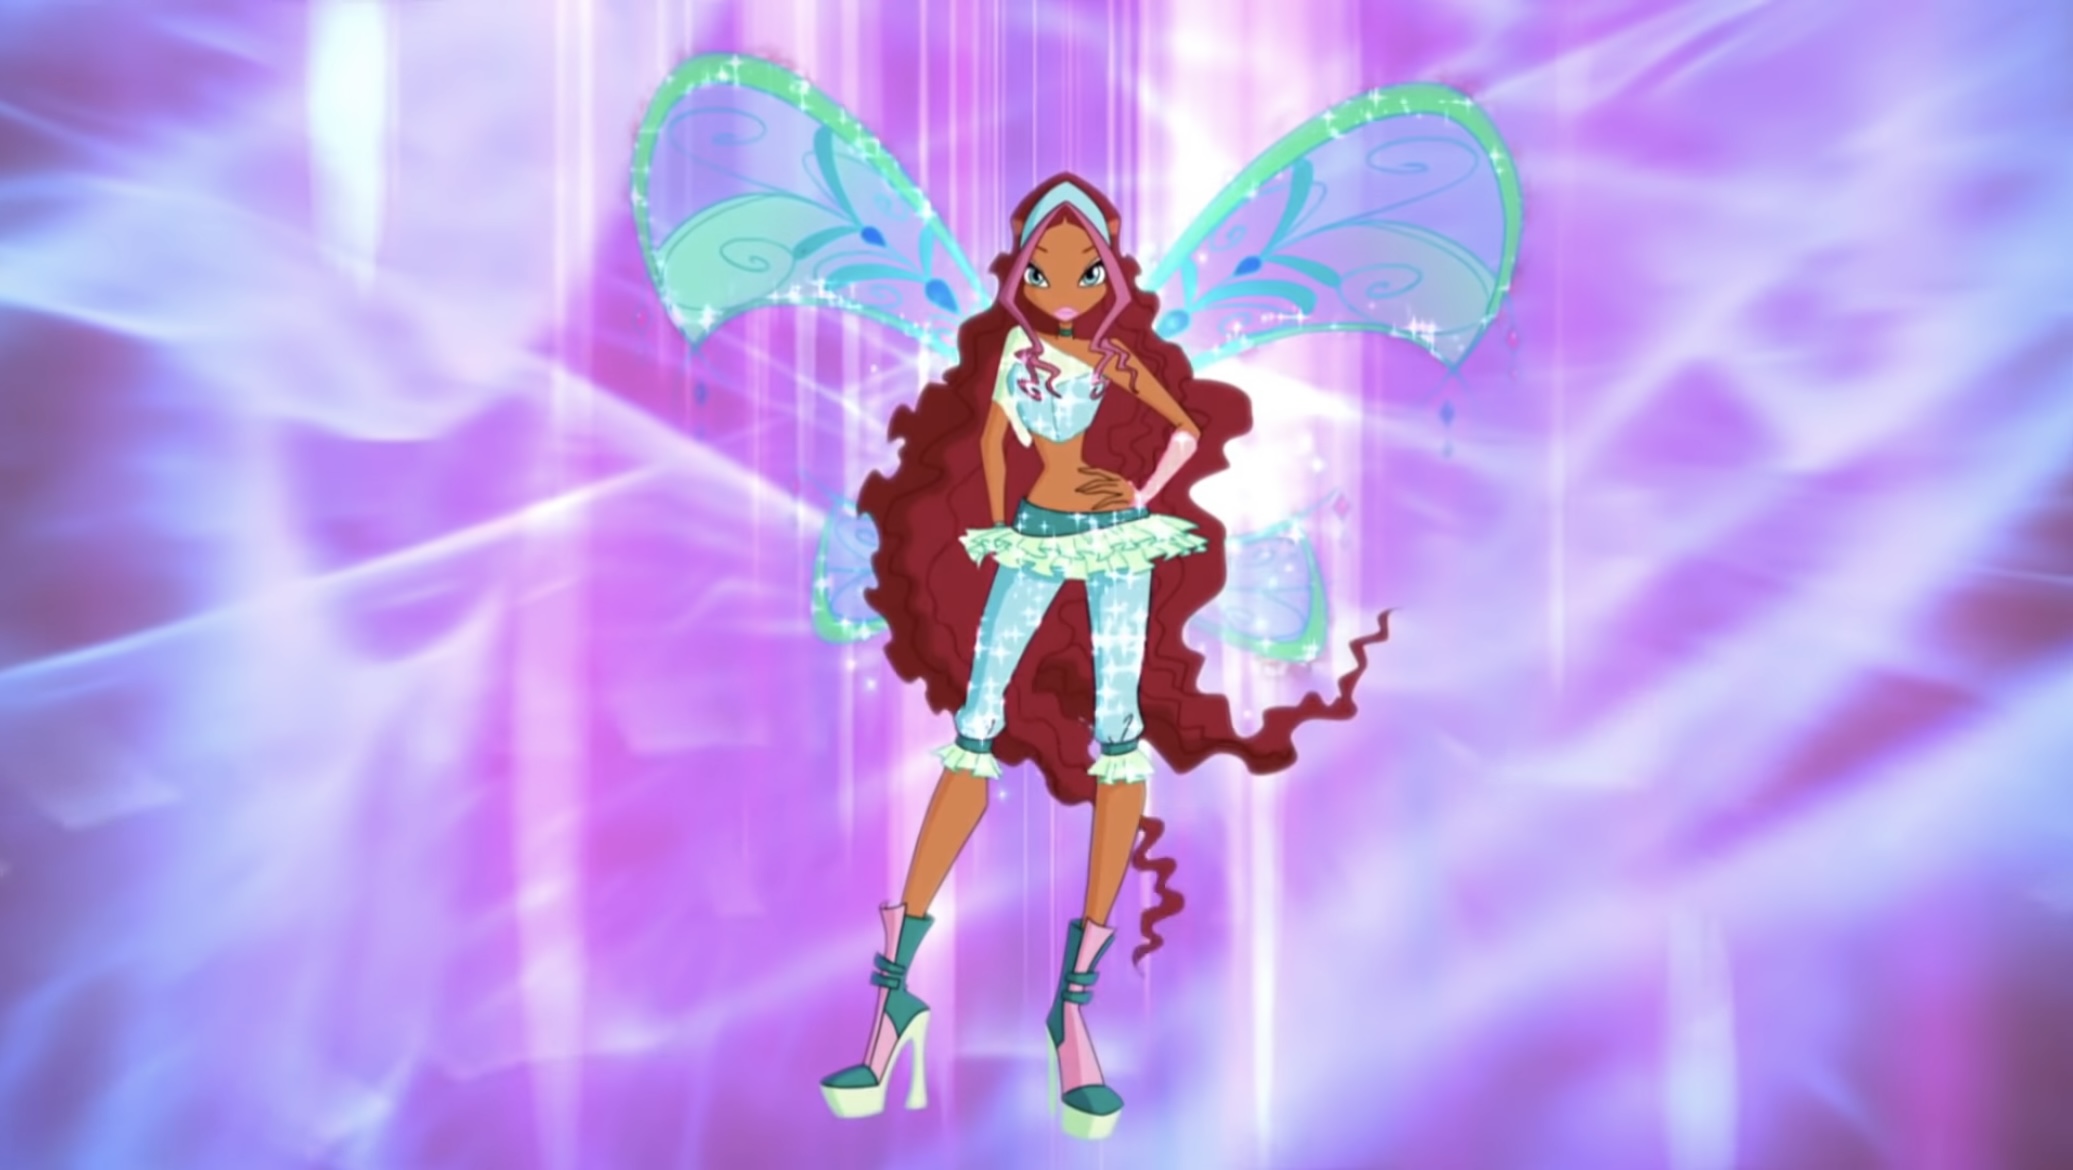 Top 10 Winx Club Magical Girl Transformations Ranked